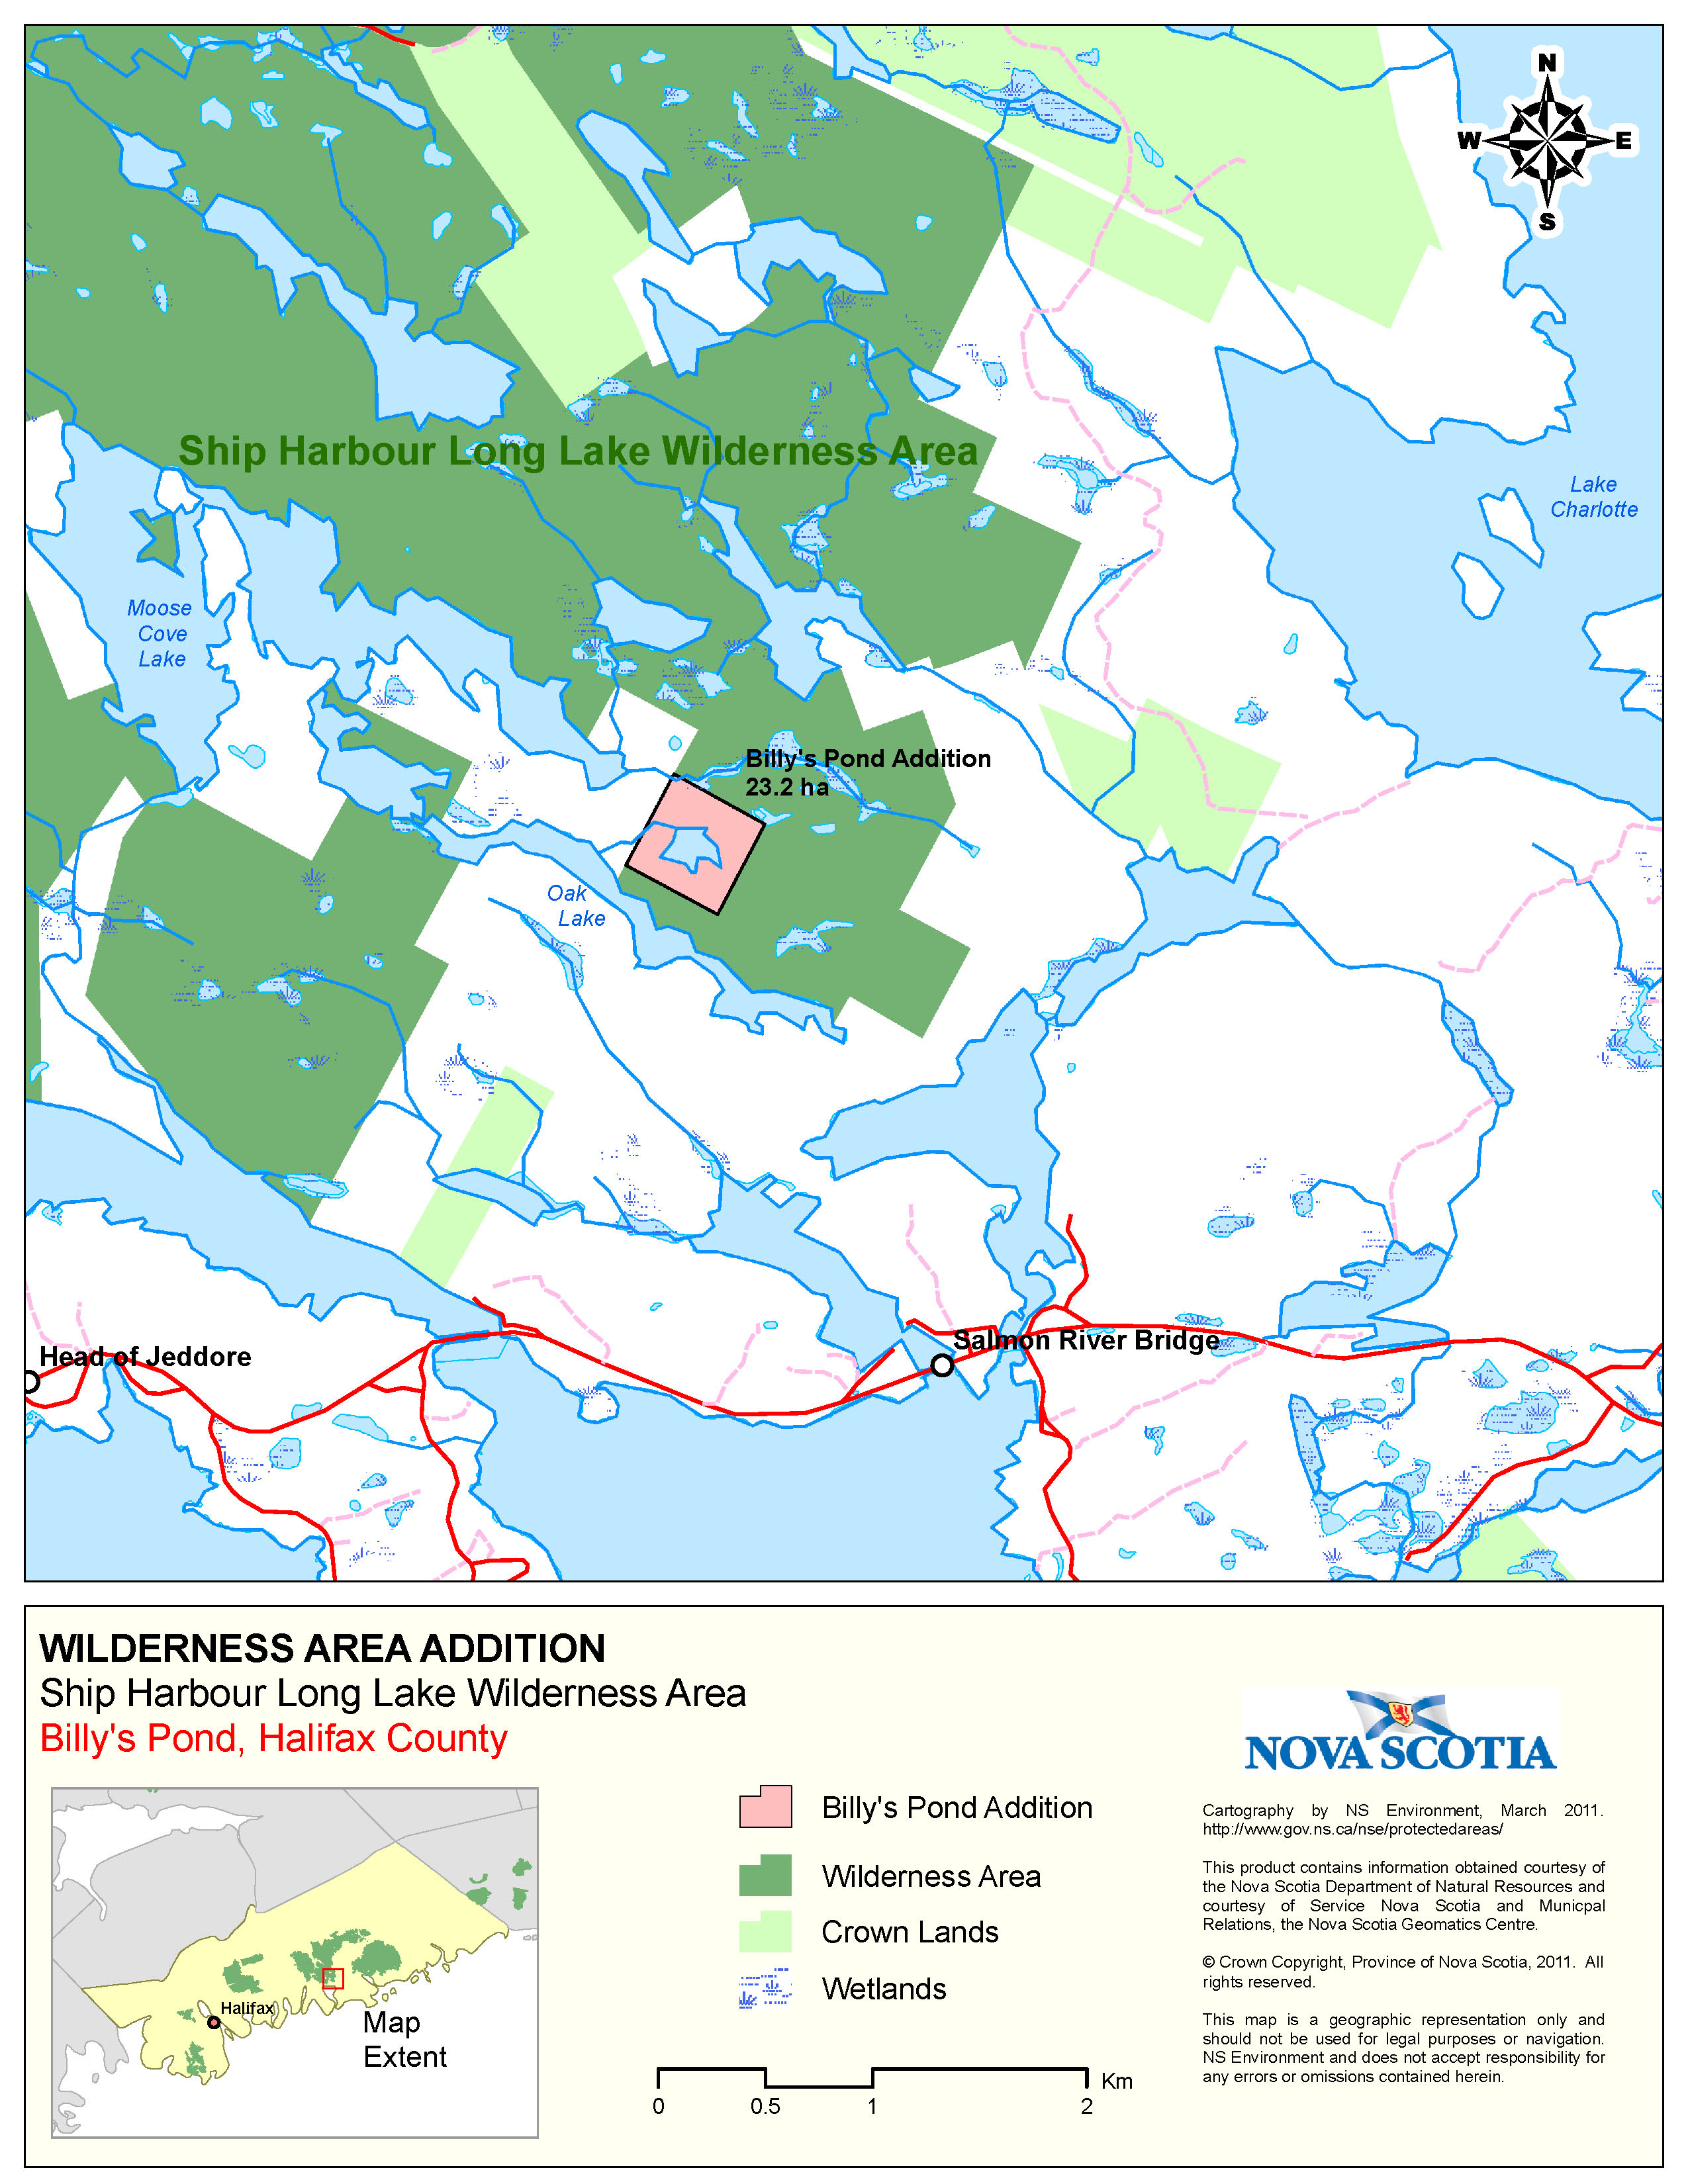 Graphic showing map of Boundaries of Crown Land at Billy’s Pond, Halifax County Addition to Ship Harbour Long Lake Wilderness Area